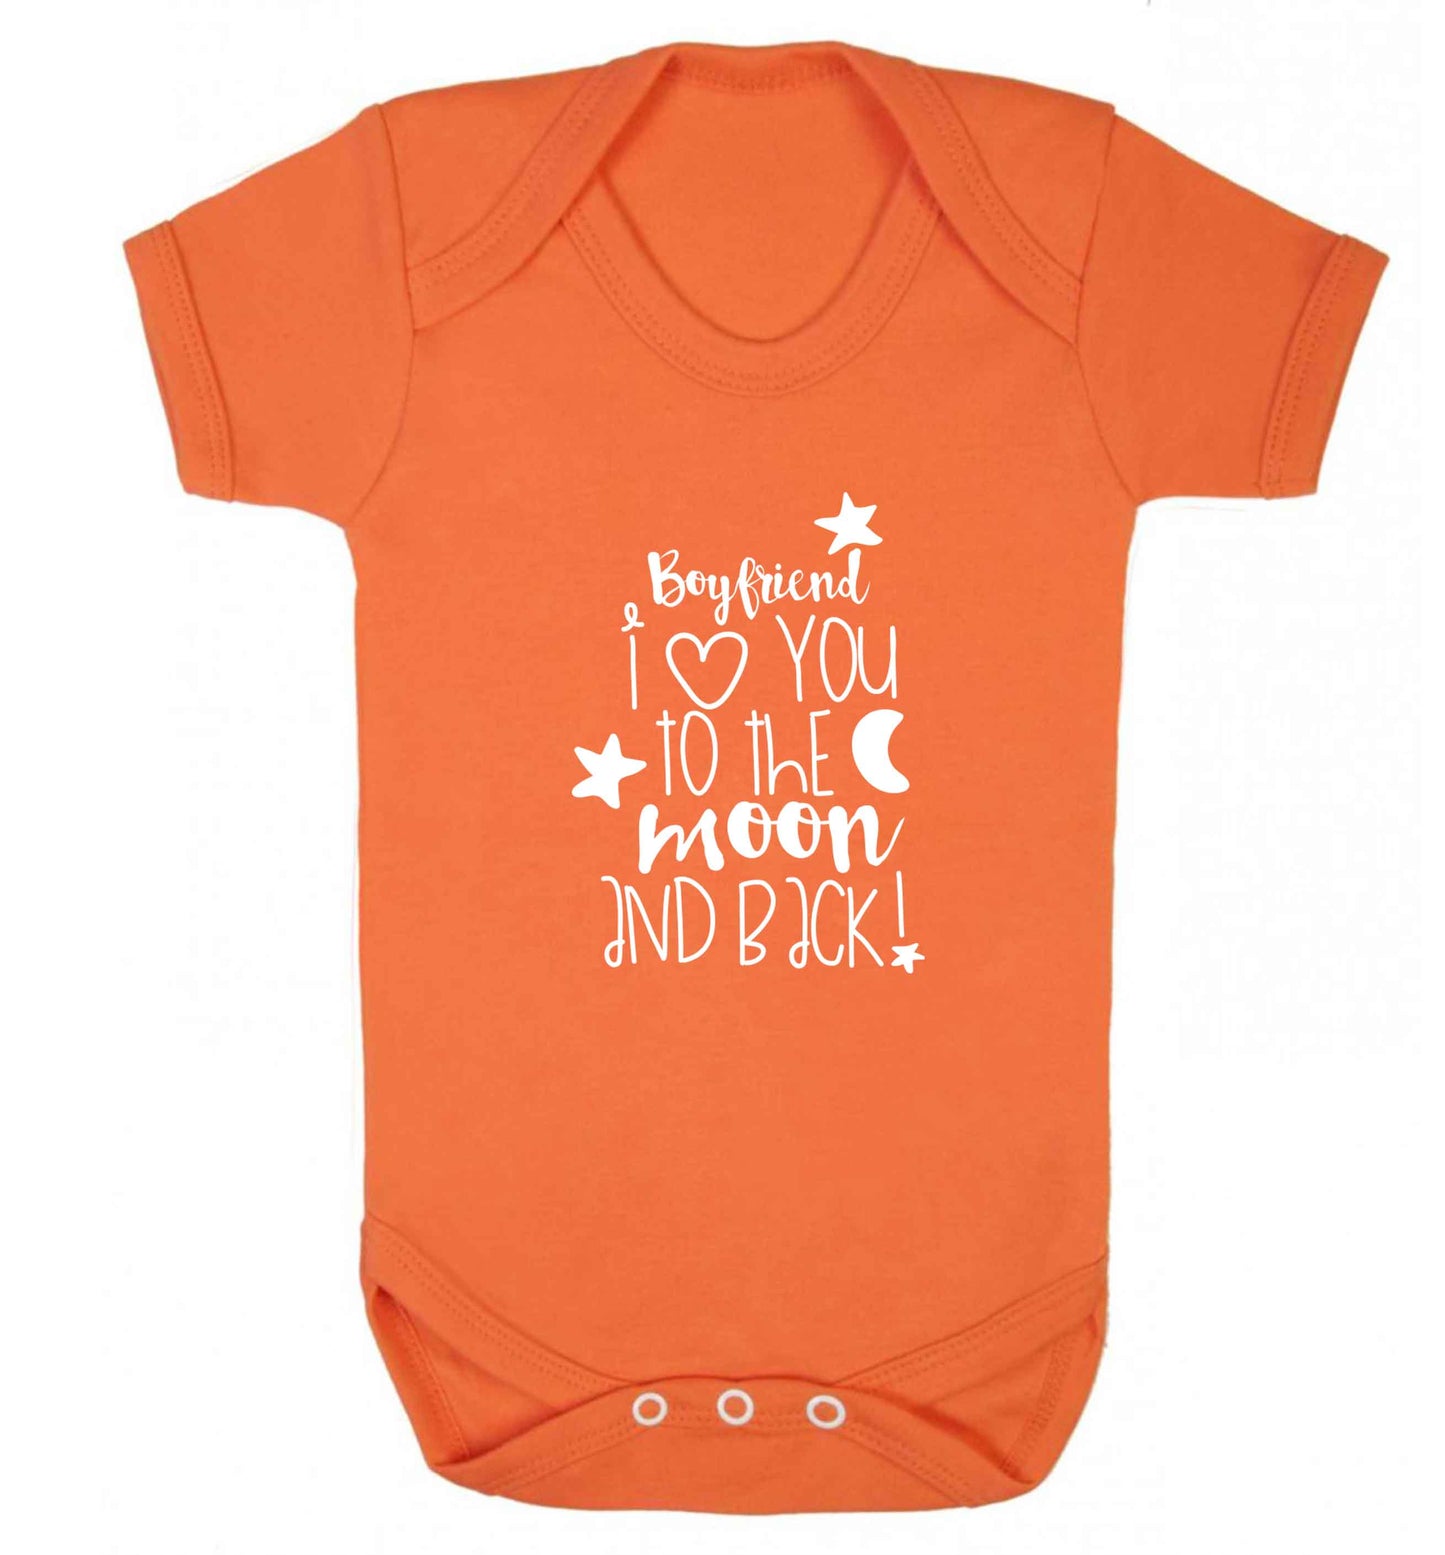 Boyfriend I love you to the moon and back baby vest orange 18-24 months